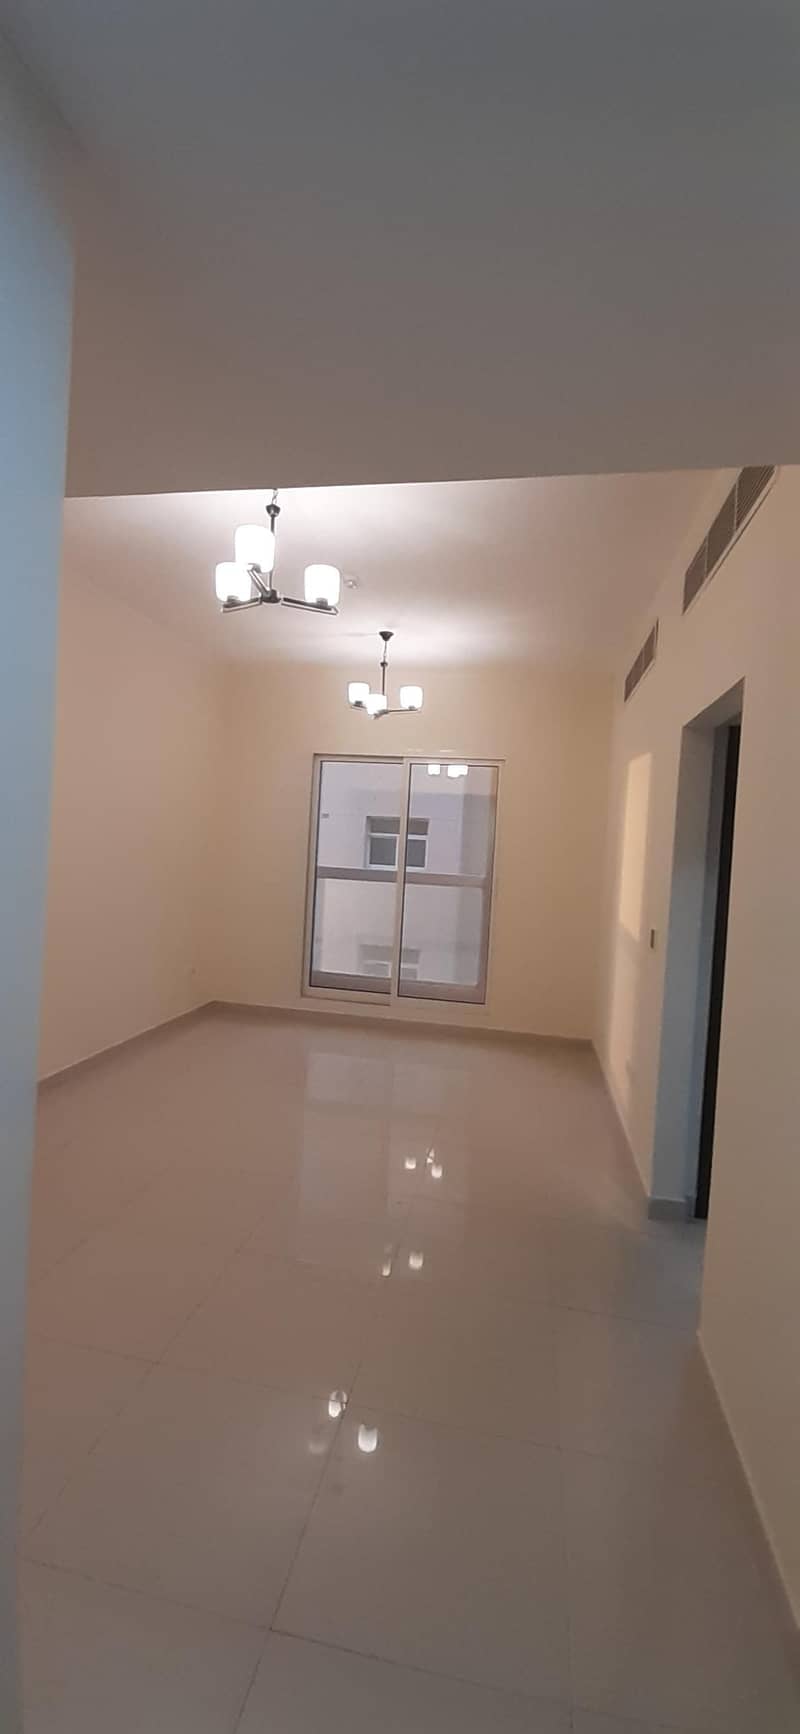 30 DAYS FREE 1 BED/HALL IN AL WARQAA RENT ONLY 29K AL MOST NEW BUILDING